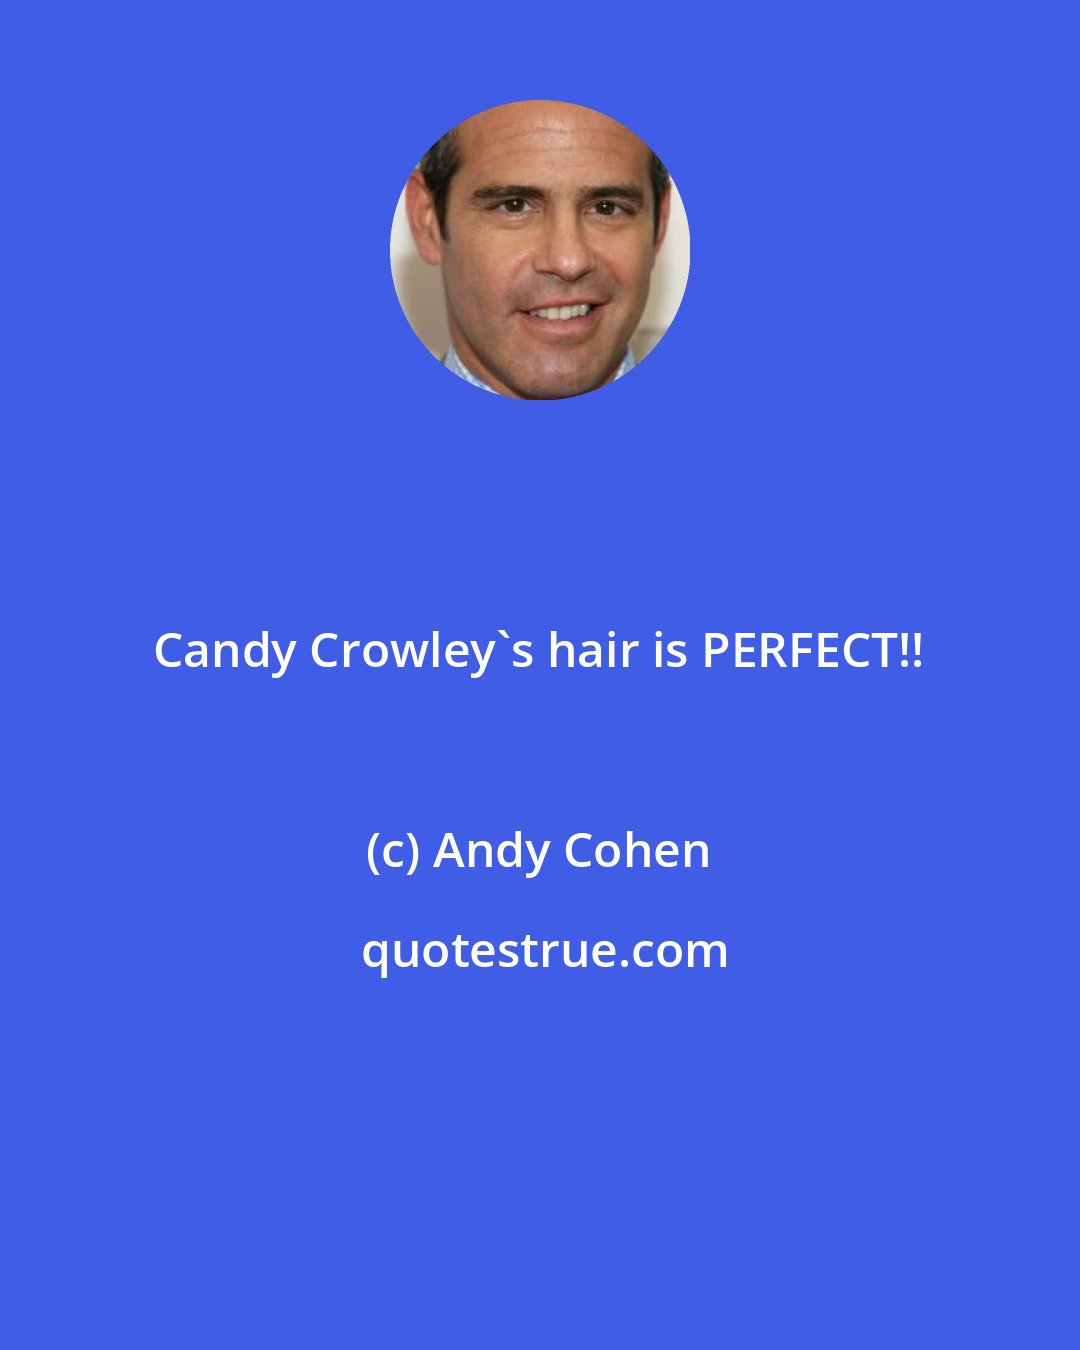 Andy Cohen: Candy Crowley's hair is PERFECT!!